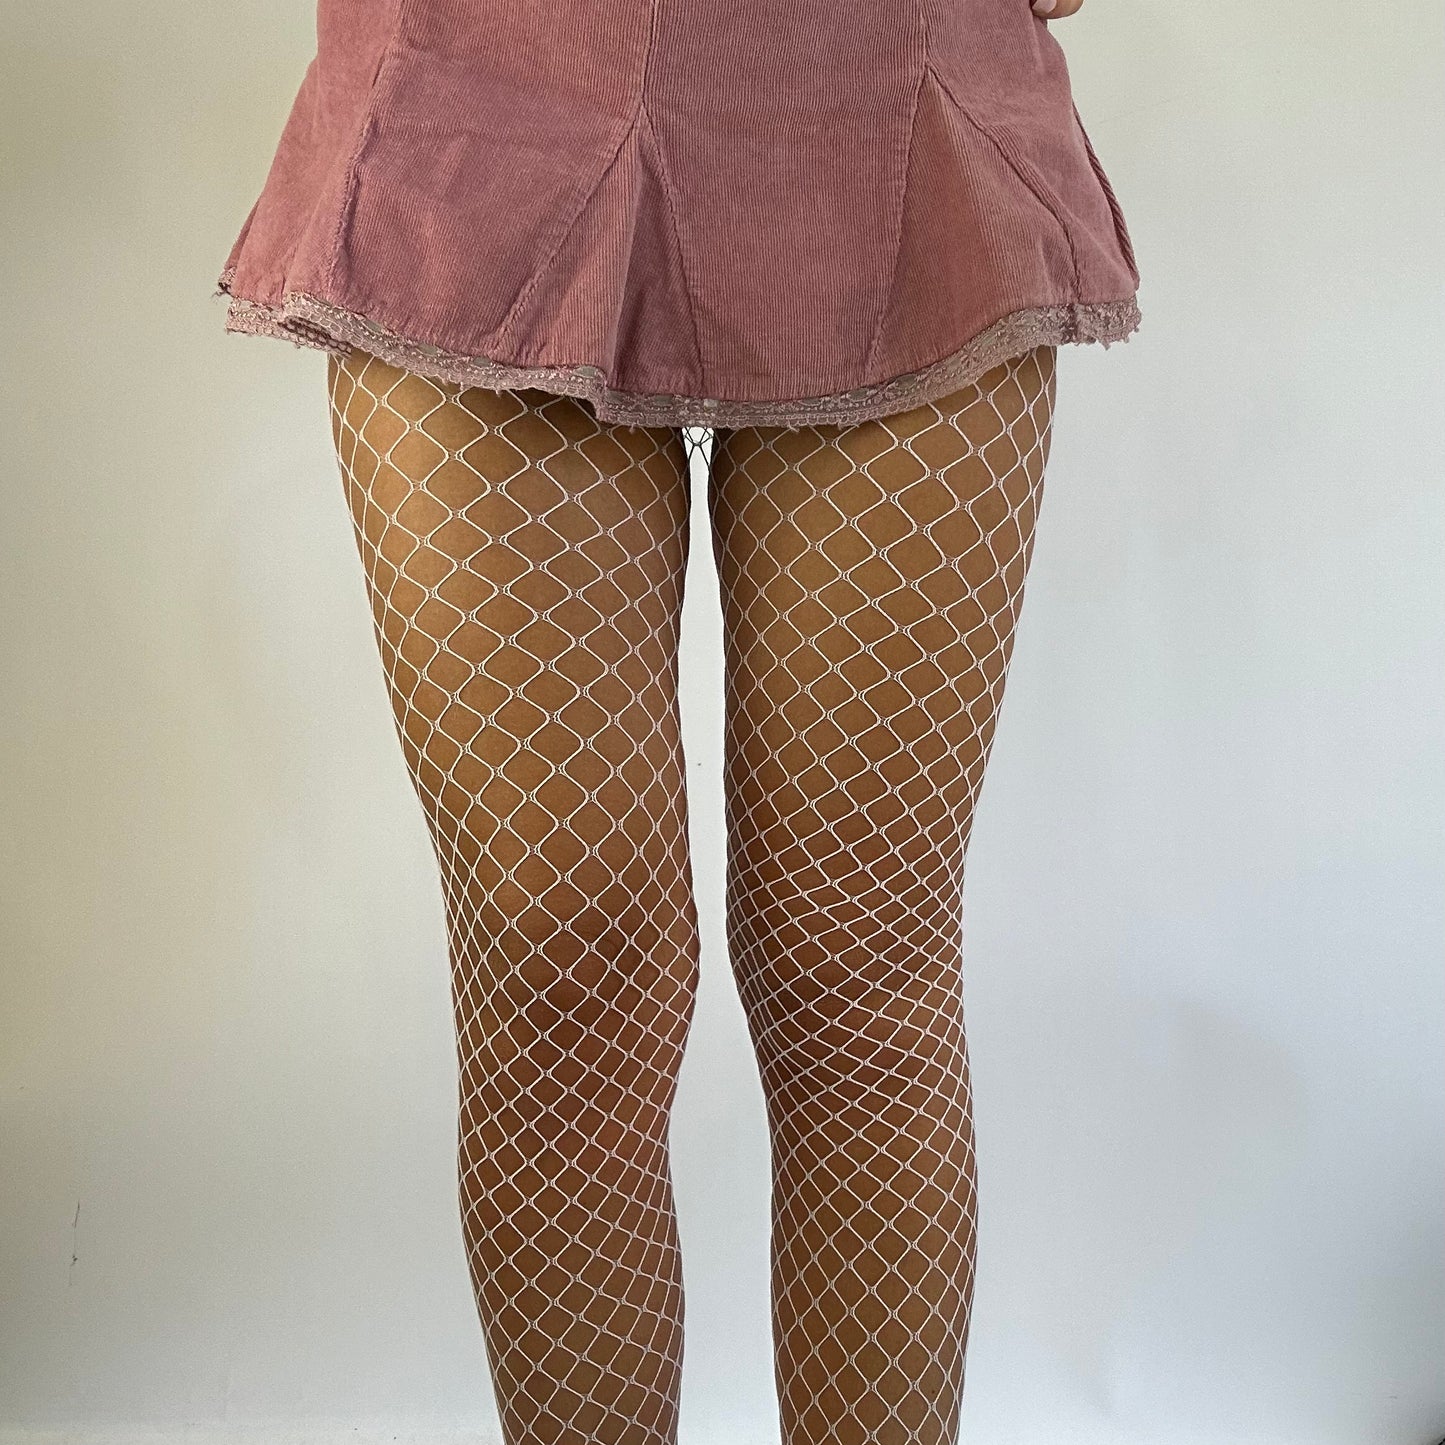 DAINTY DROP | white fishnet tights - small